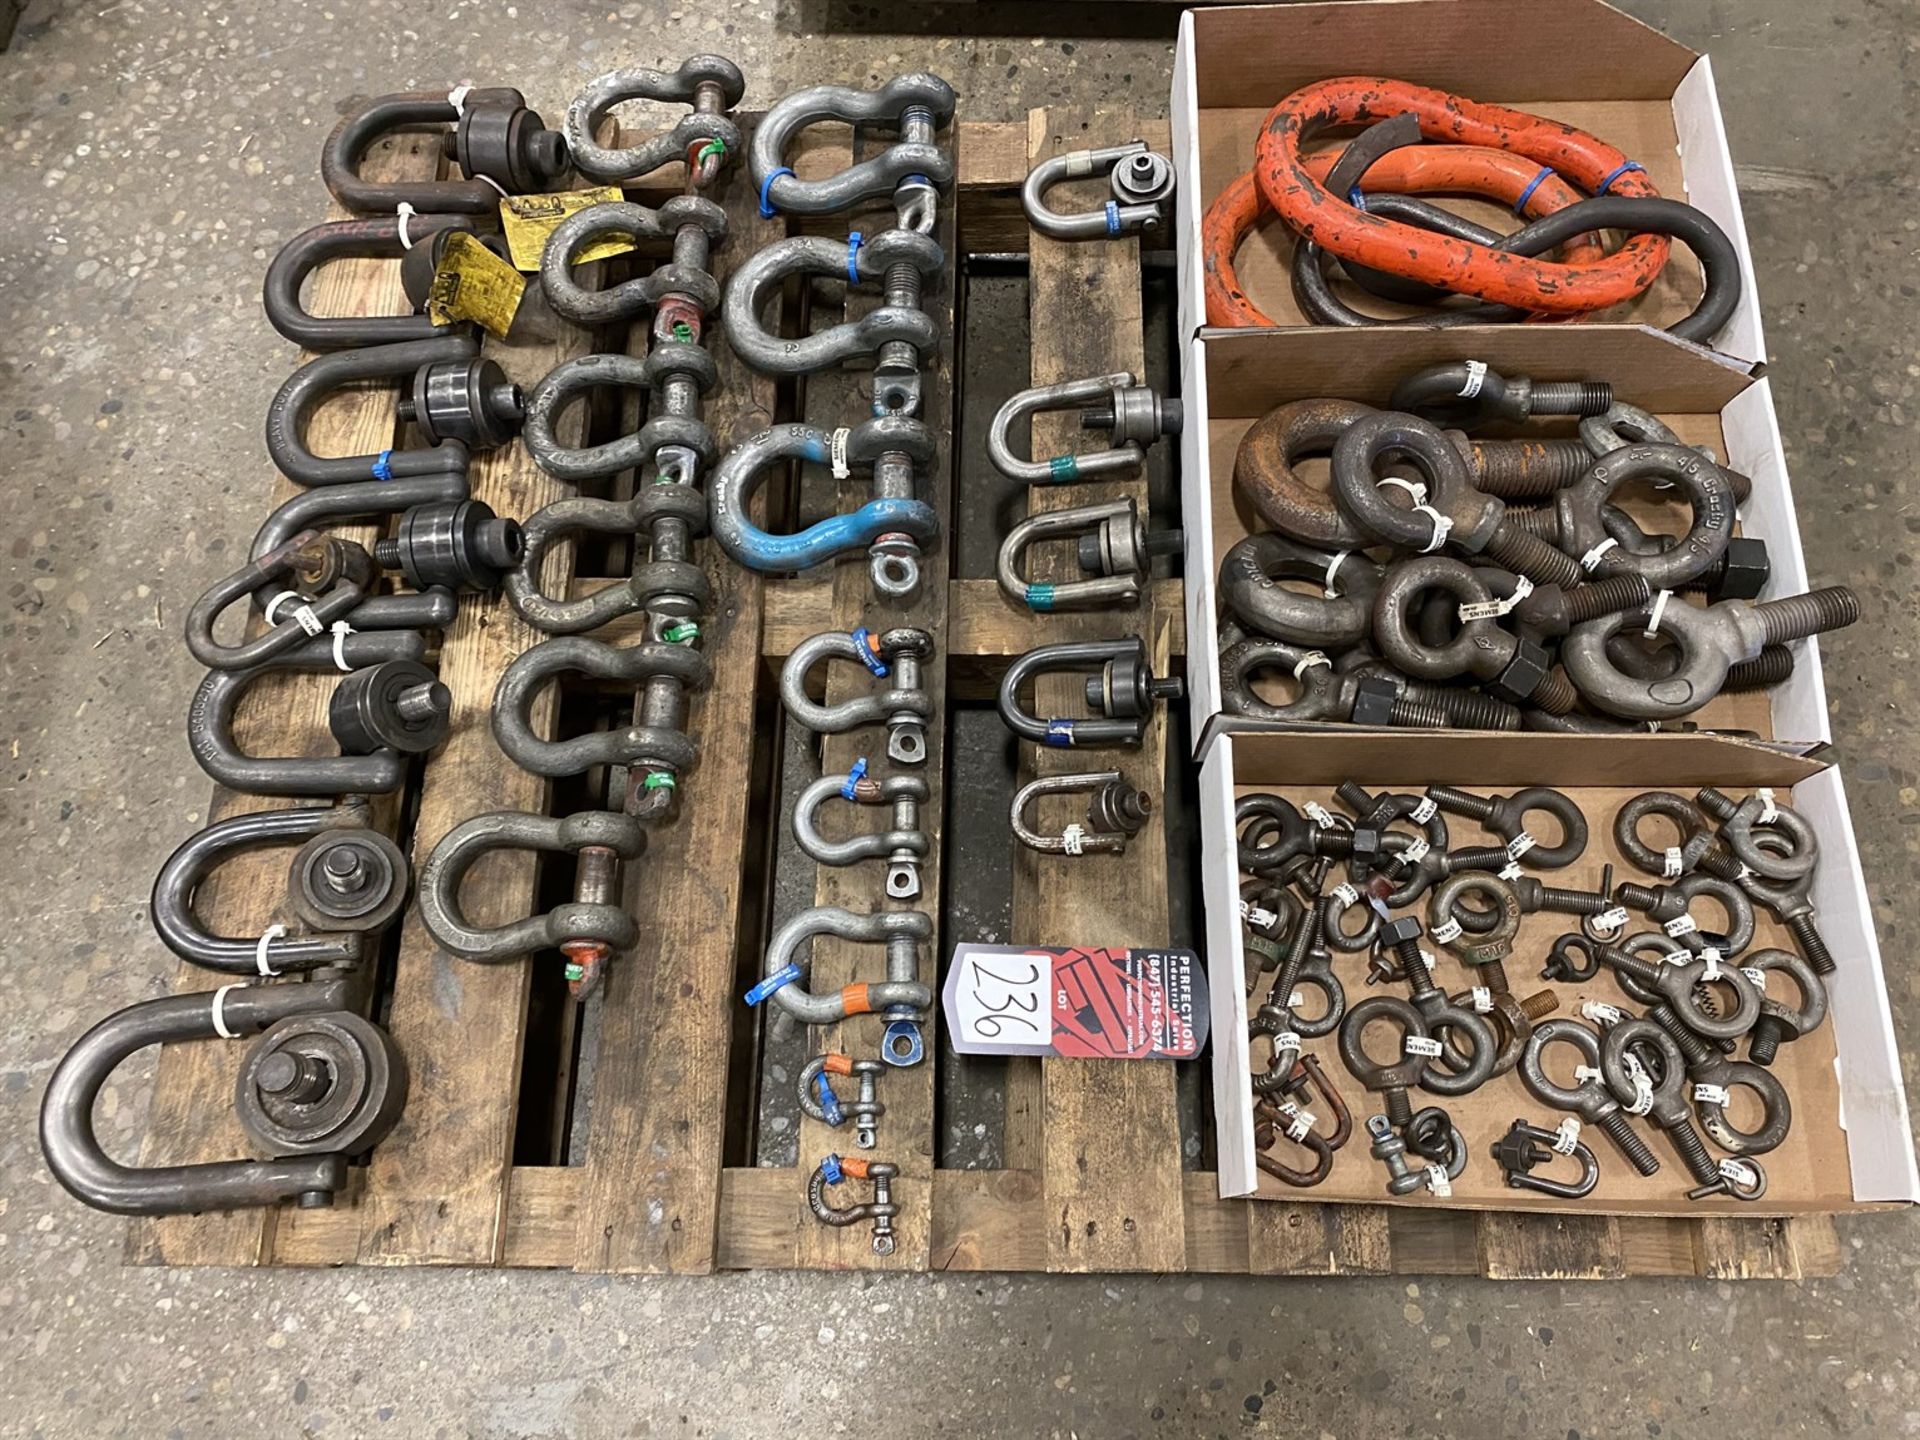 Lot of Hoist Rings, Eye Bolts, and Clevises - Image 2 of 2